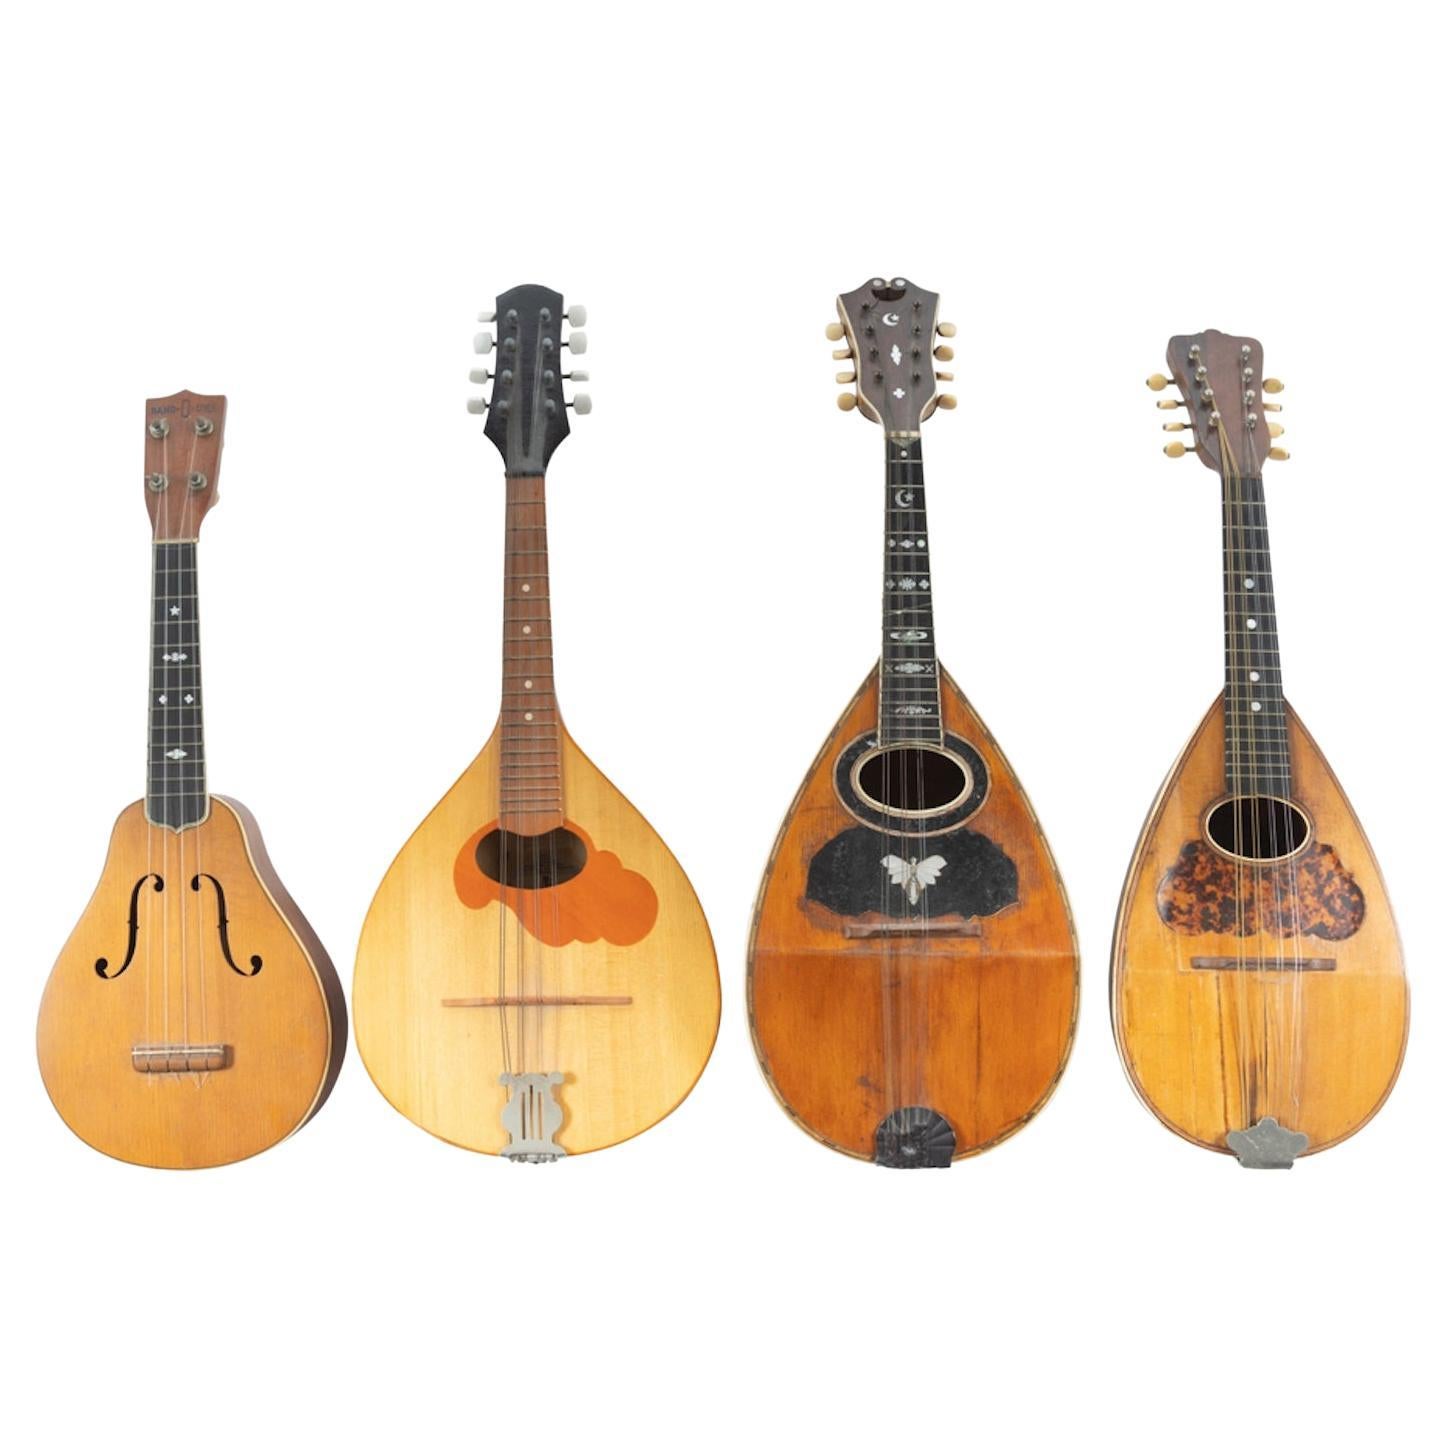 Collection of Four Mandolins, Some with Inlay, Tortoiseshelle, Satin Wood